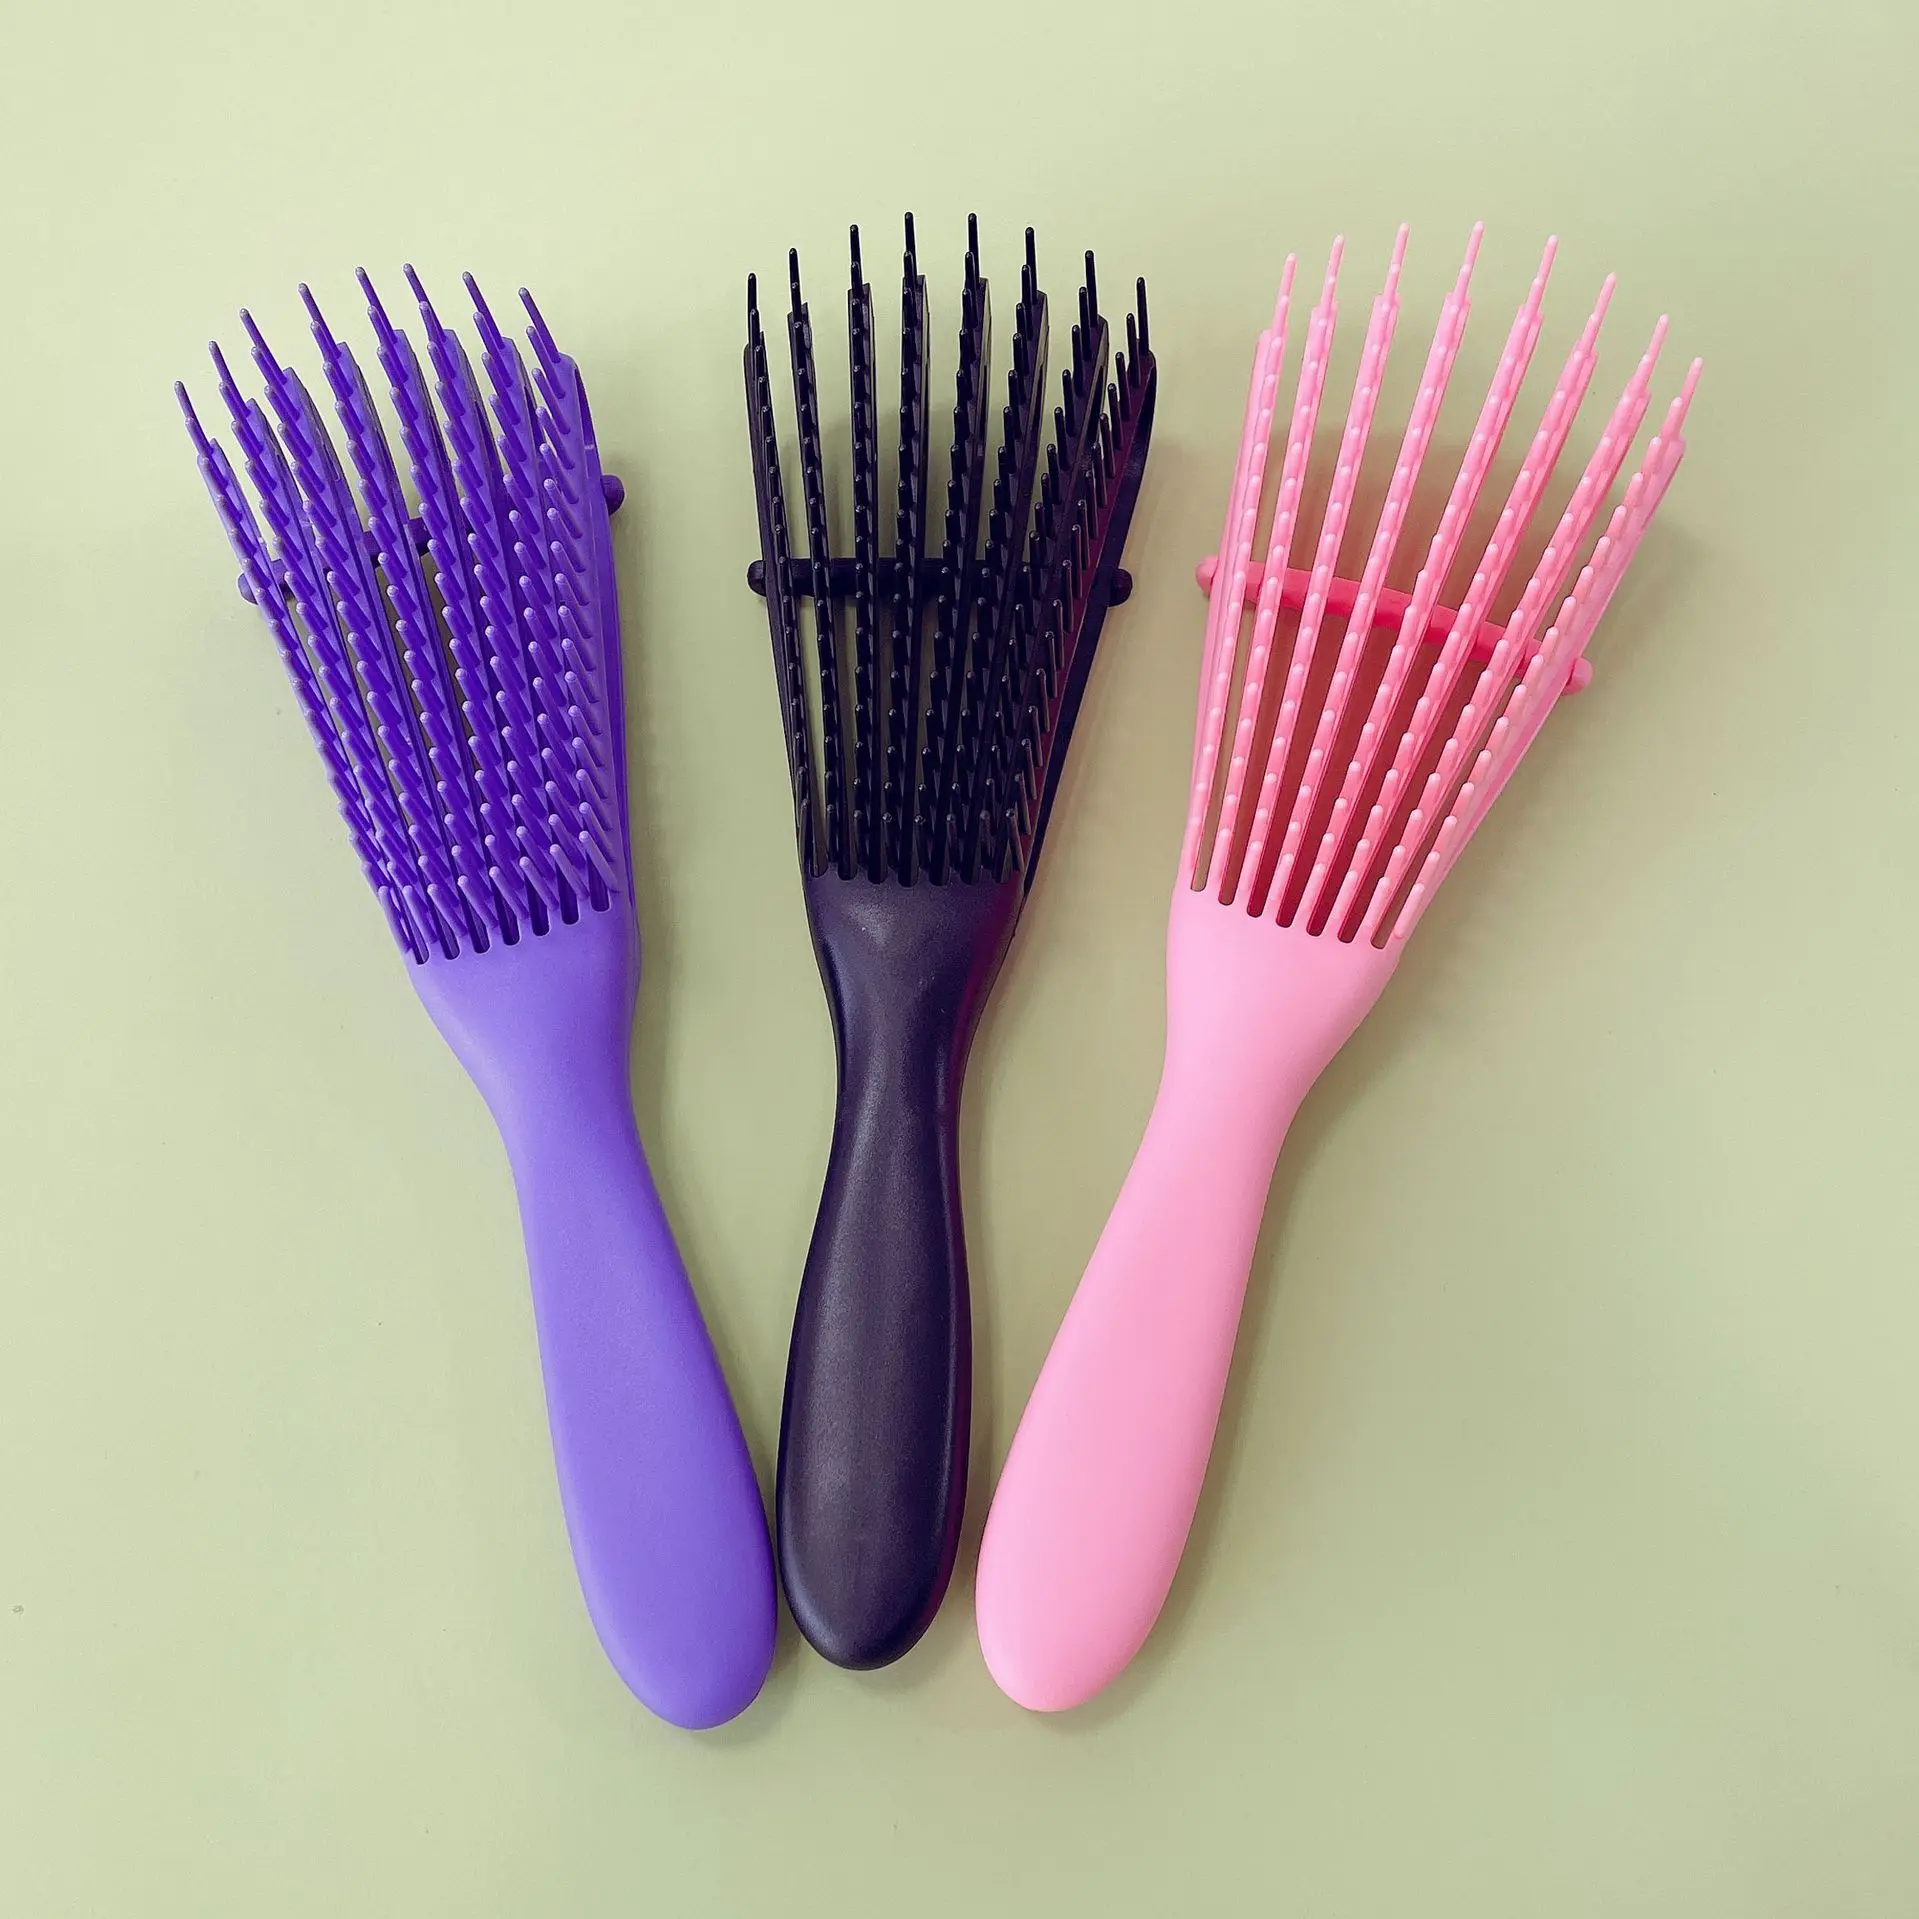 New Style Eight-claw Massage Comb Best Brush For Frizzy Hair - Buy Scalp  Massage Detangle Eight-claw Hair Comb Sets,Eight-claw Comb,Personalized Hair  Brush Product on 